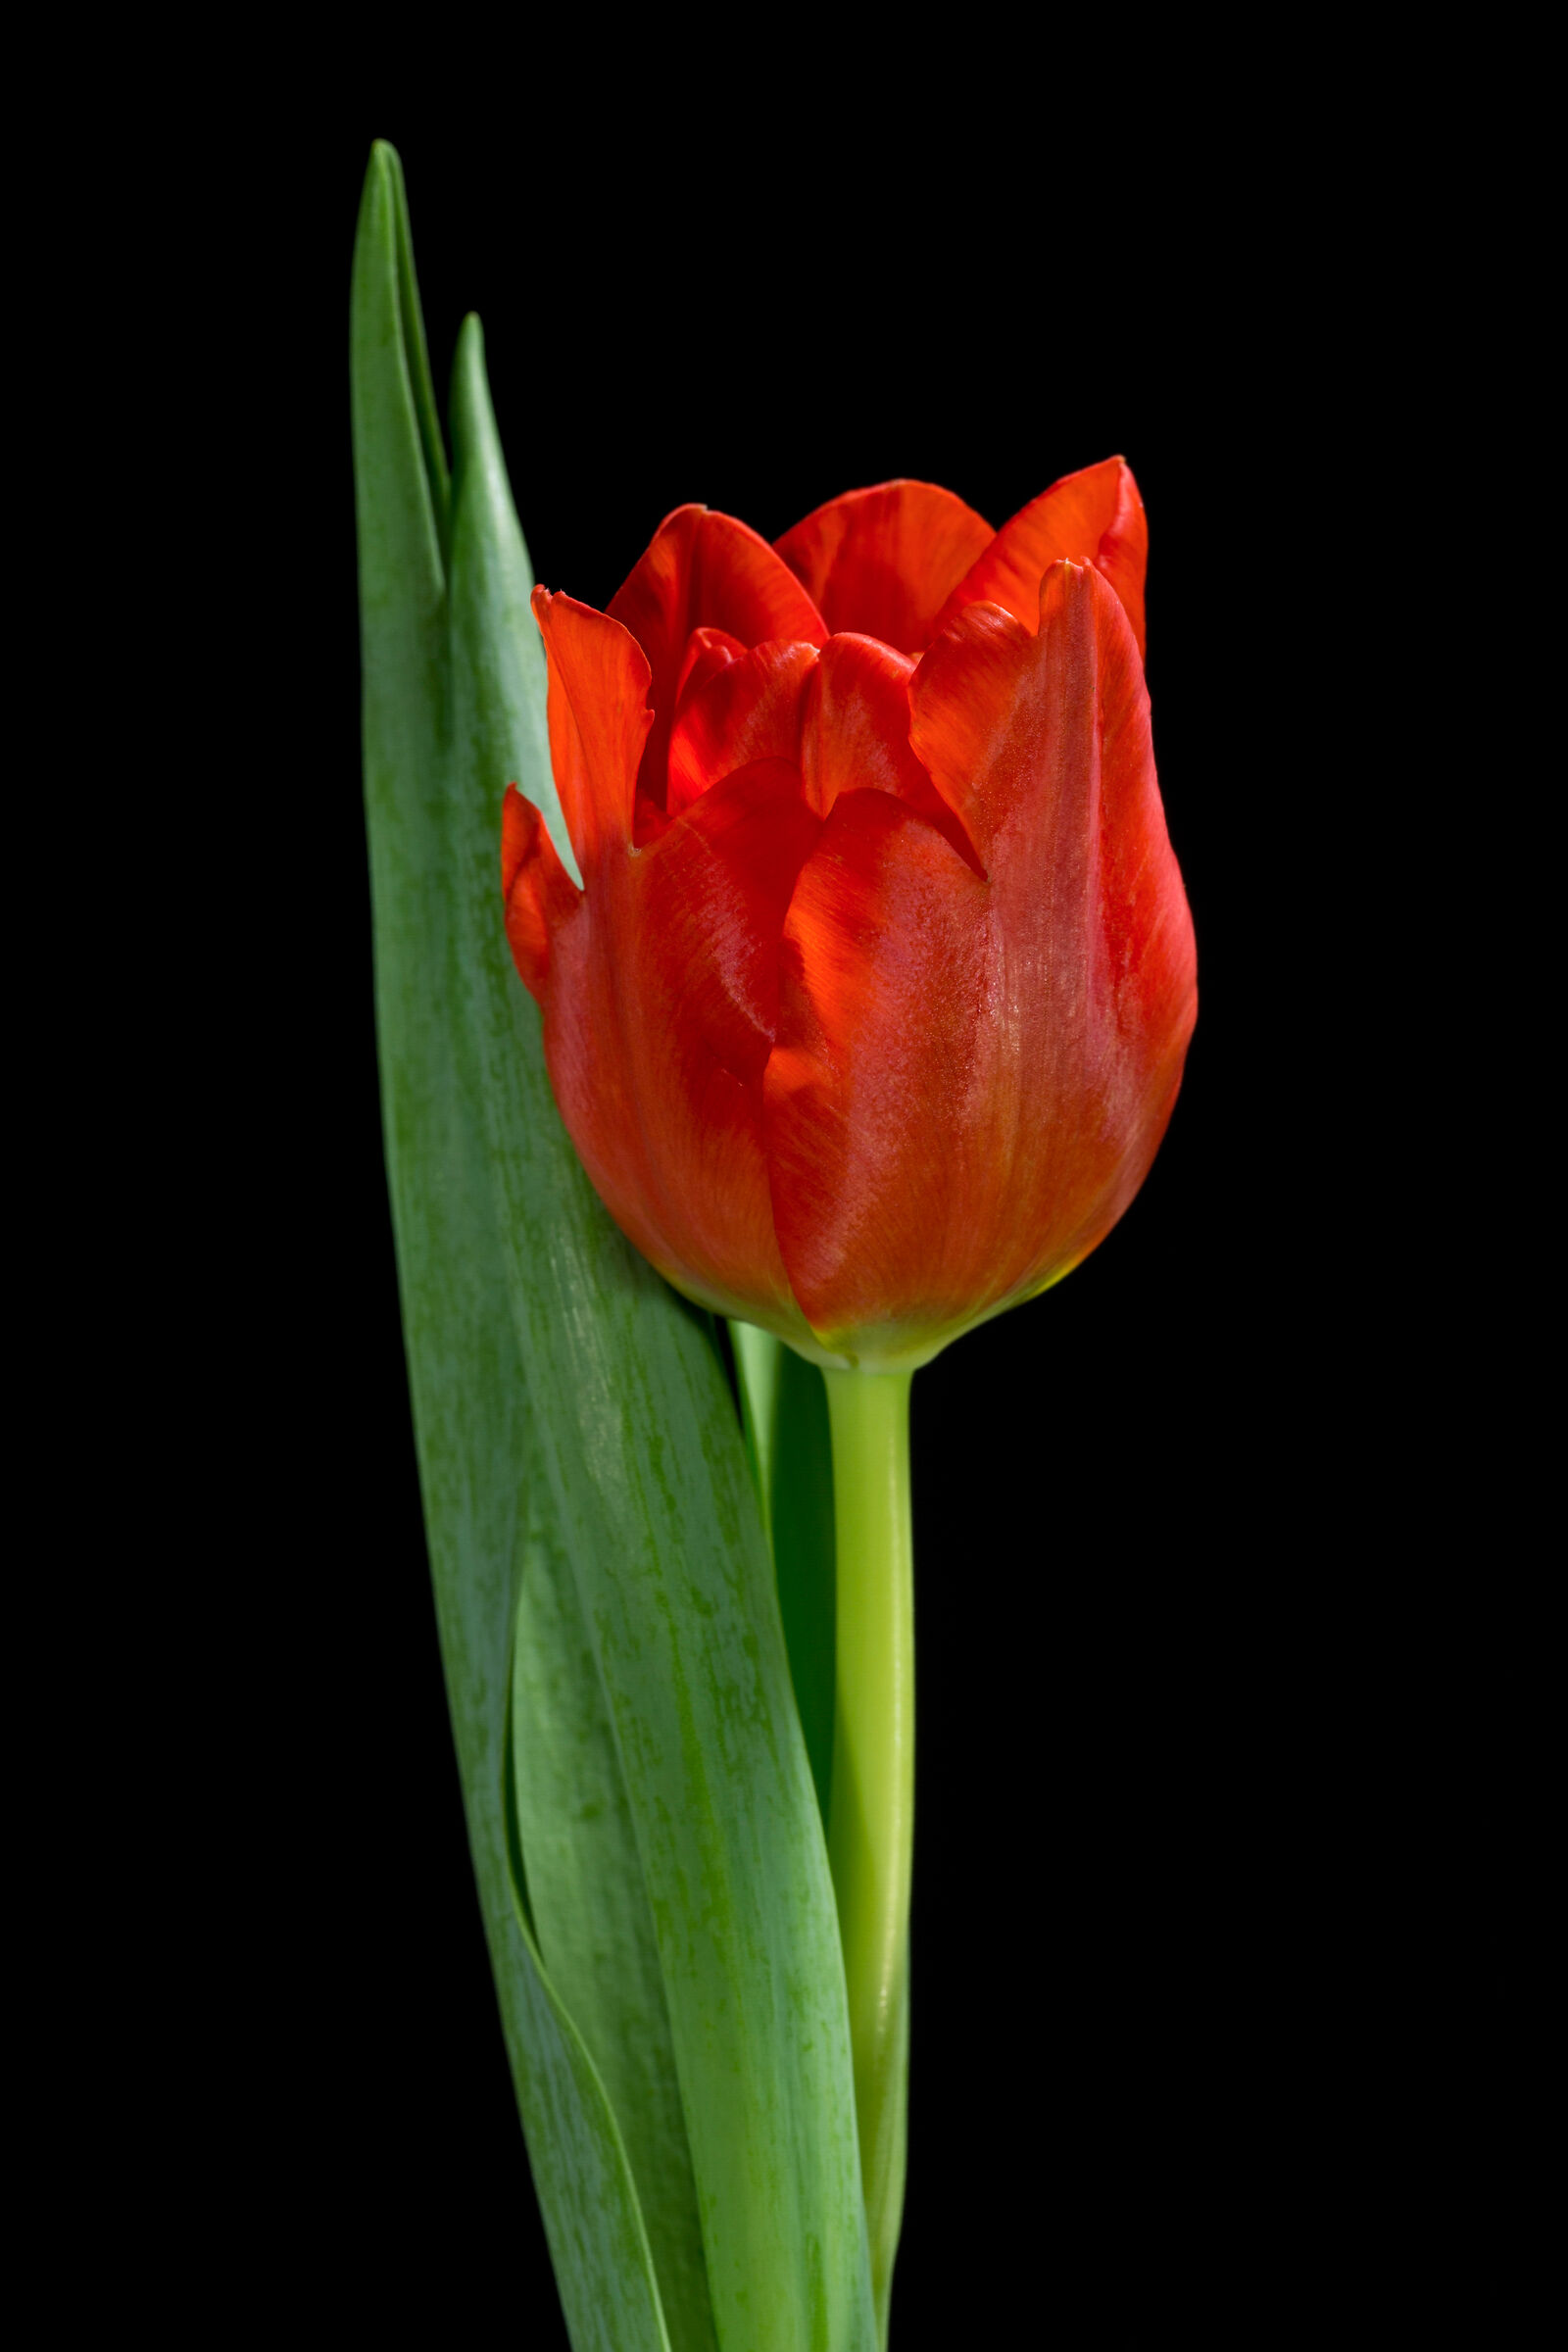 Tulips Time...